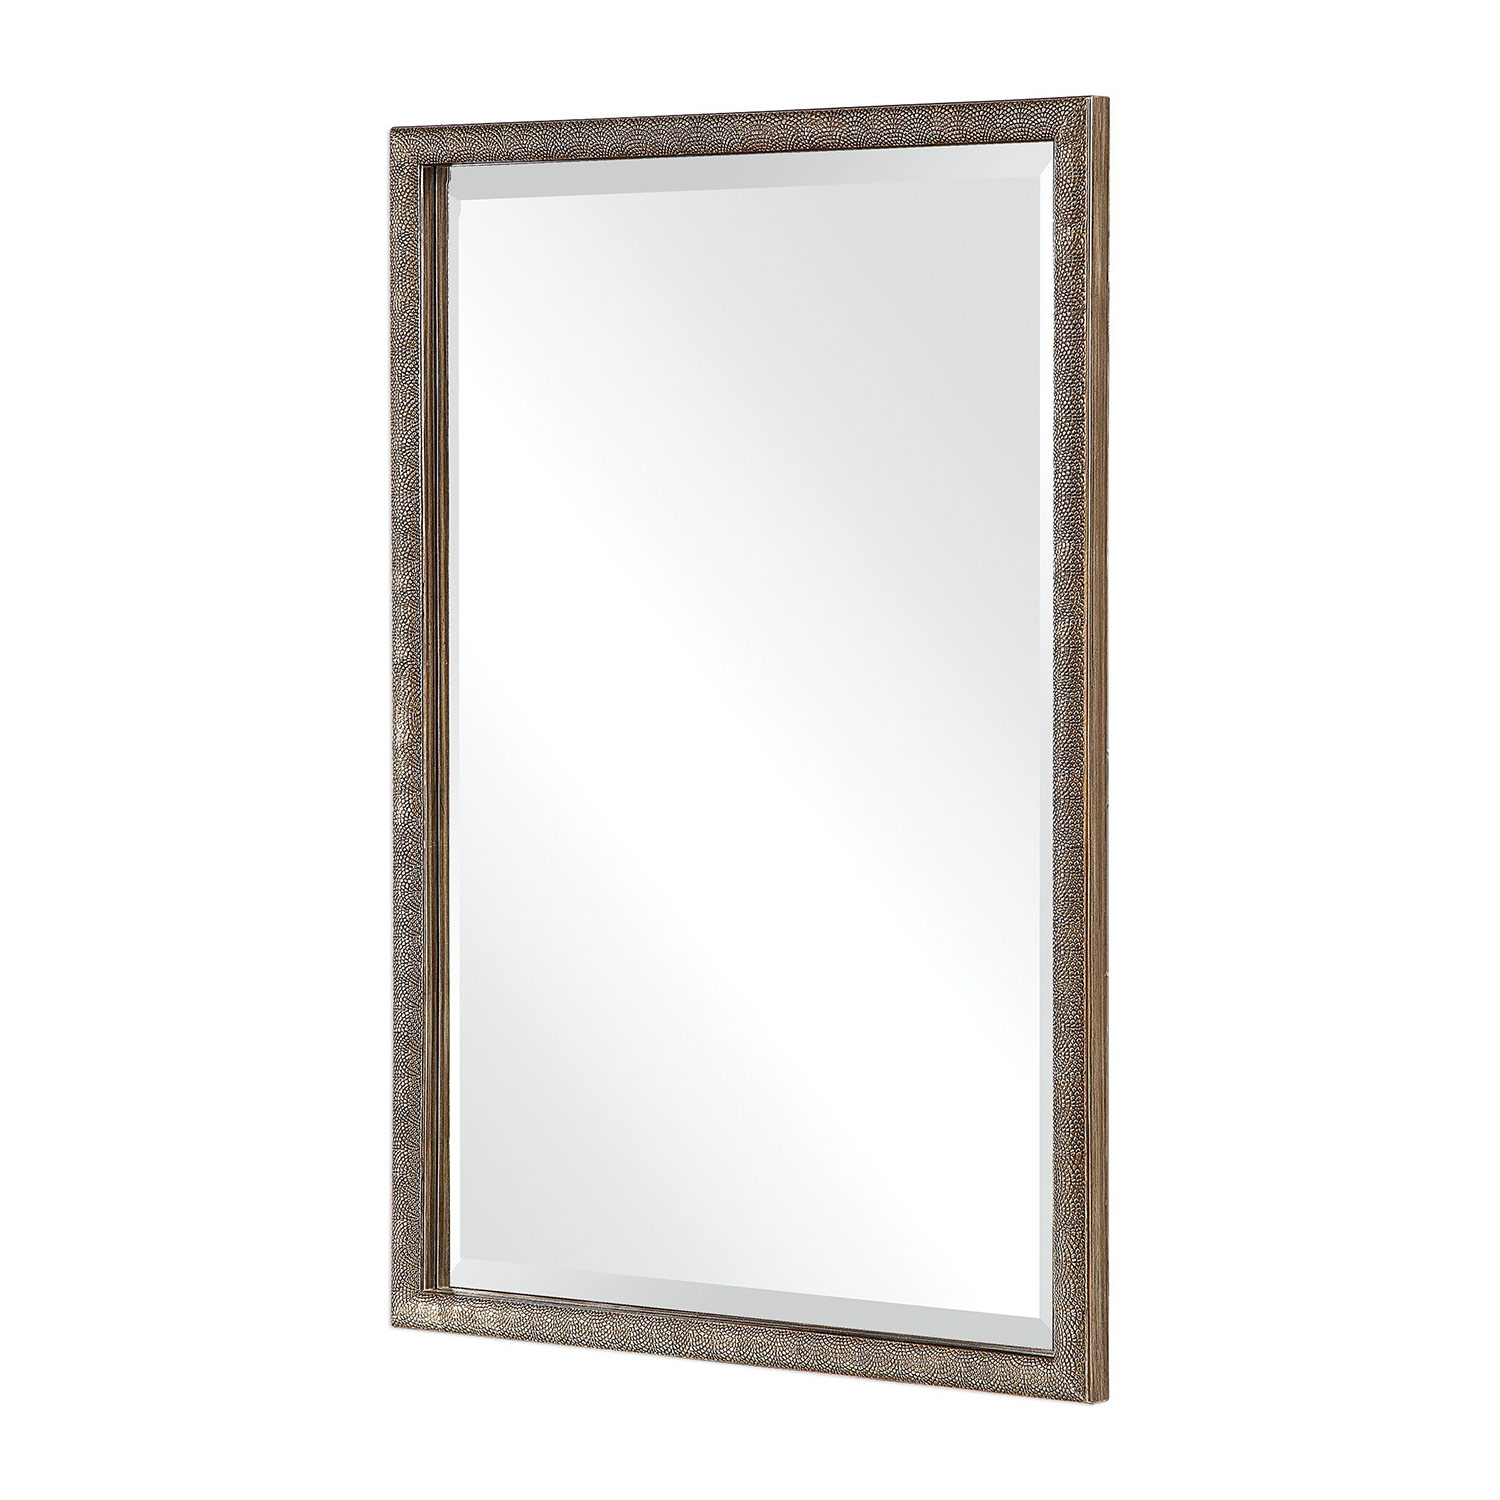 Uttermost Barree Mirror - Antiqued Champagne